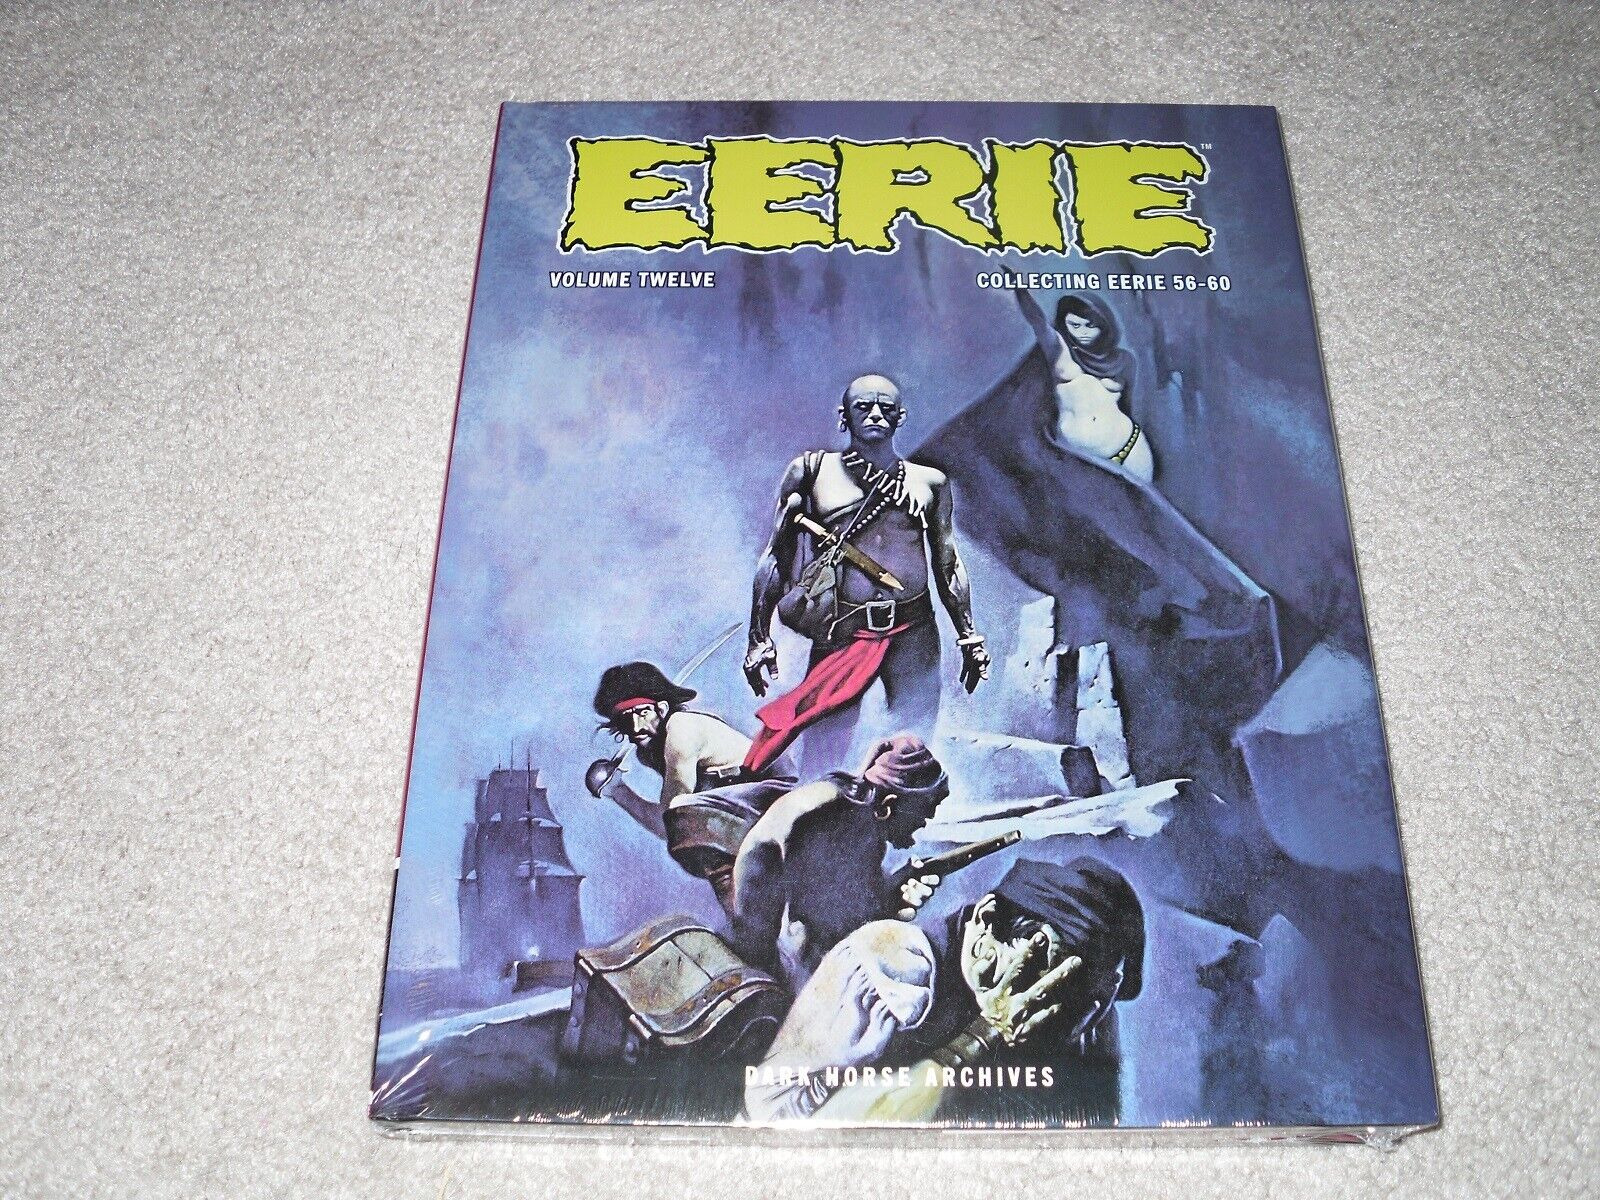 Eerie Archives Volume 12 Hardcover Book - Dark Horse Archives - Sealed